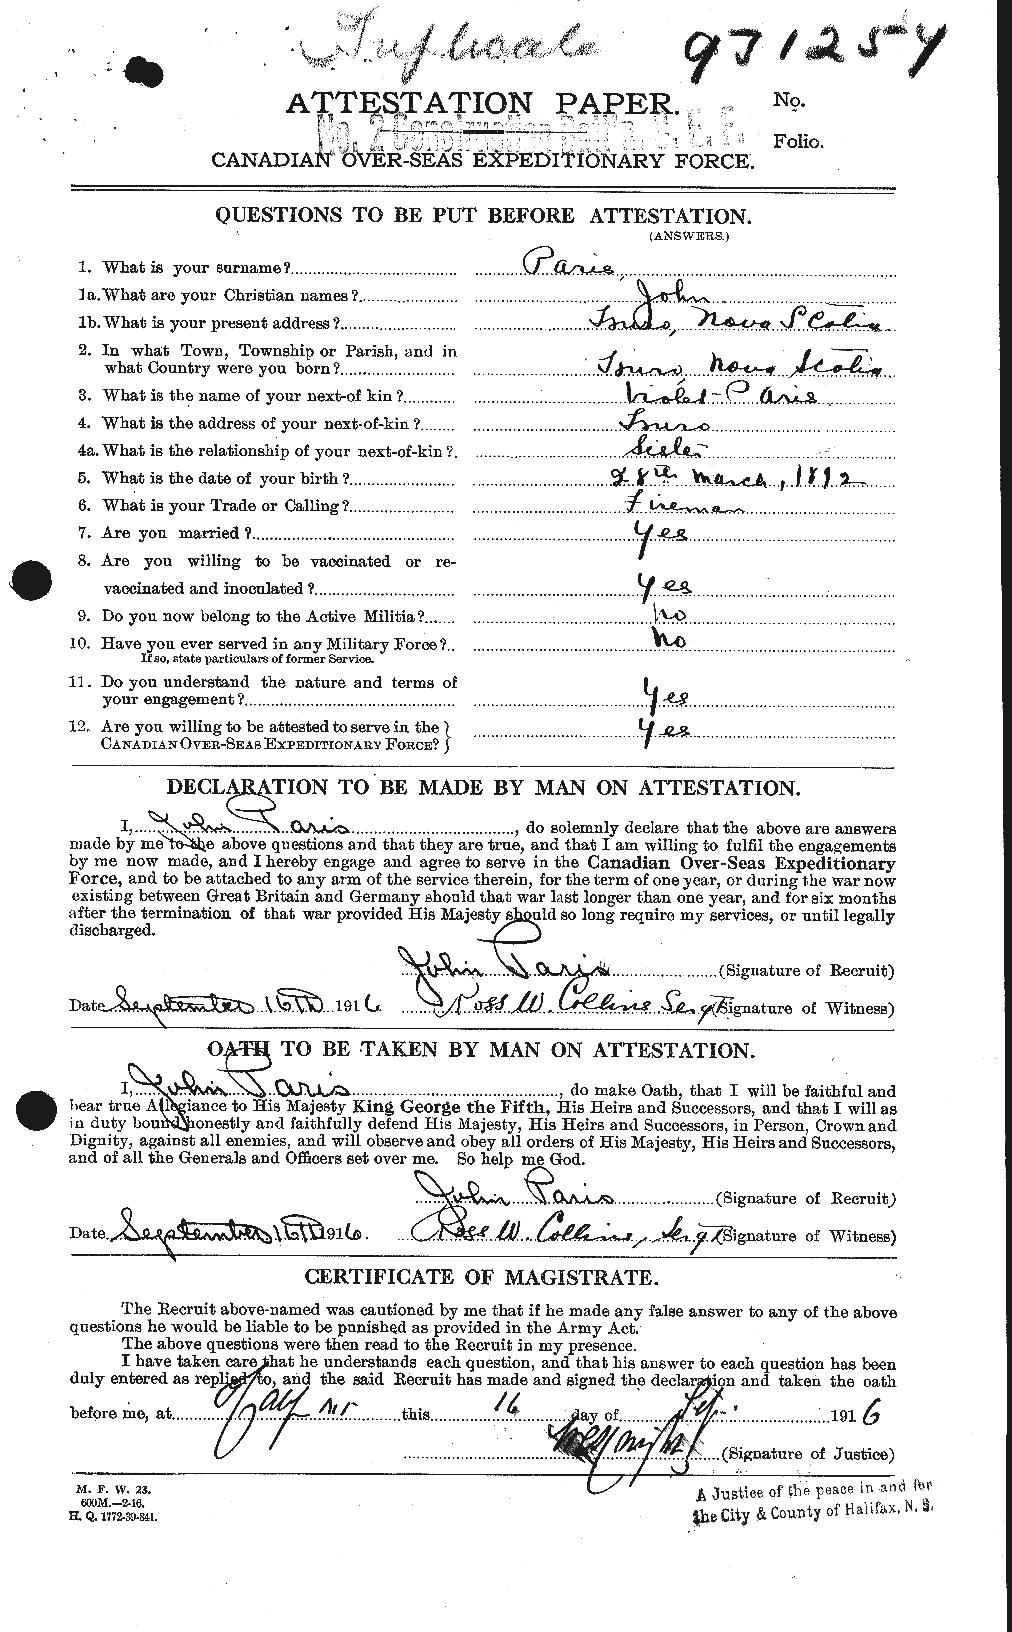 Personnel Records of the First World War - CEF 564601a